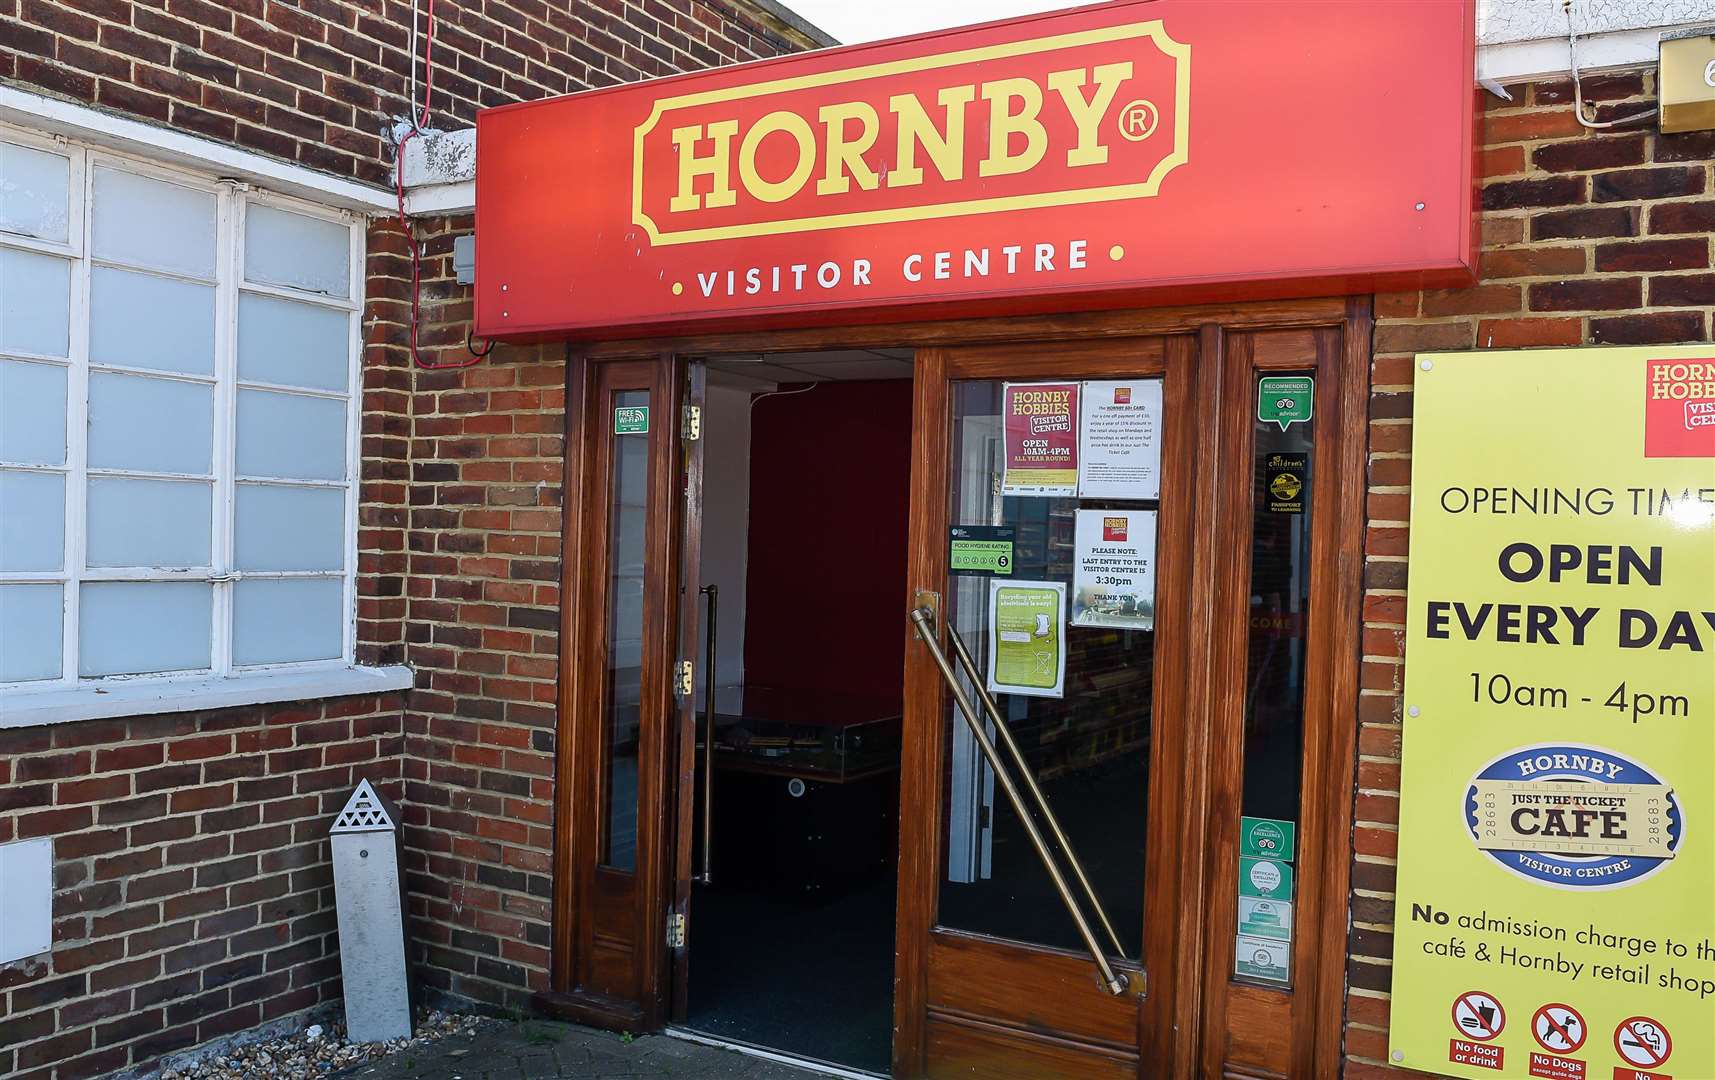 Hornby is based in Margate